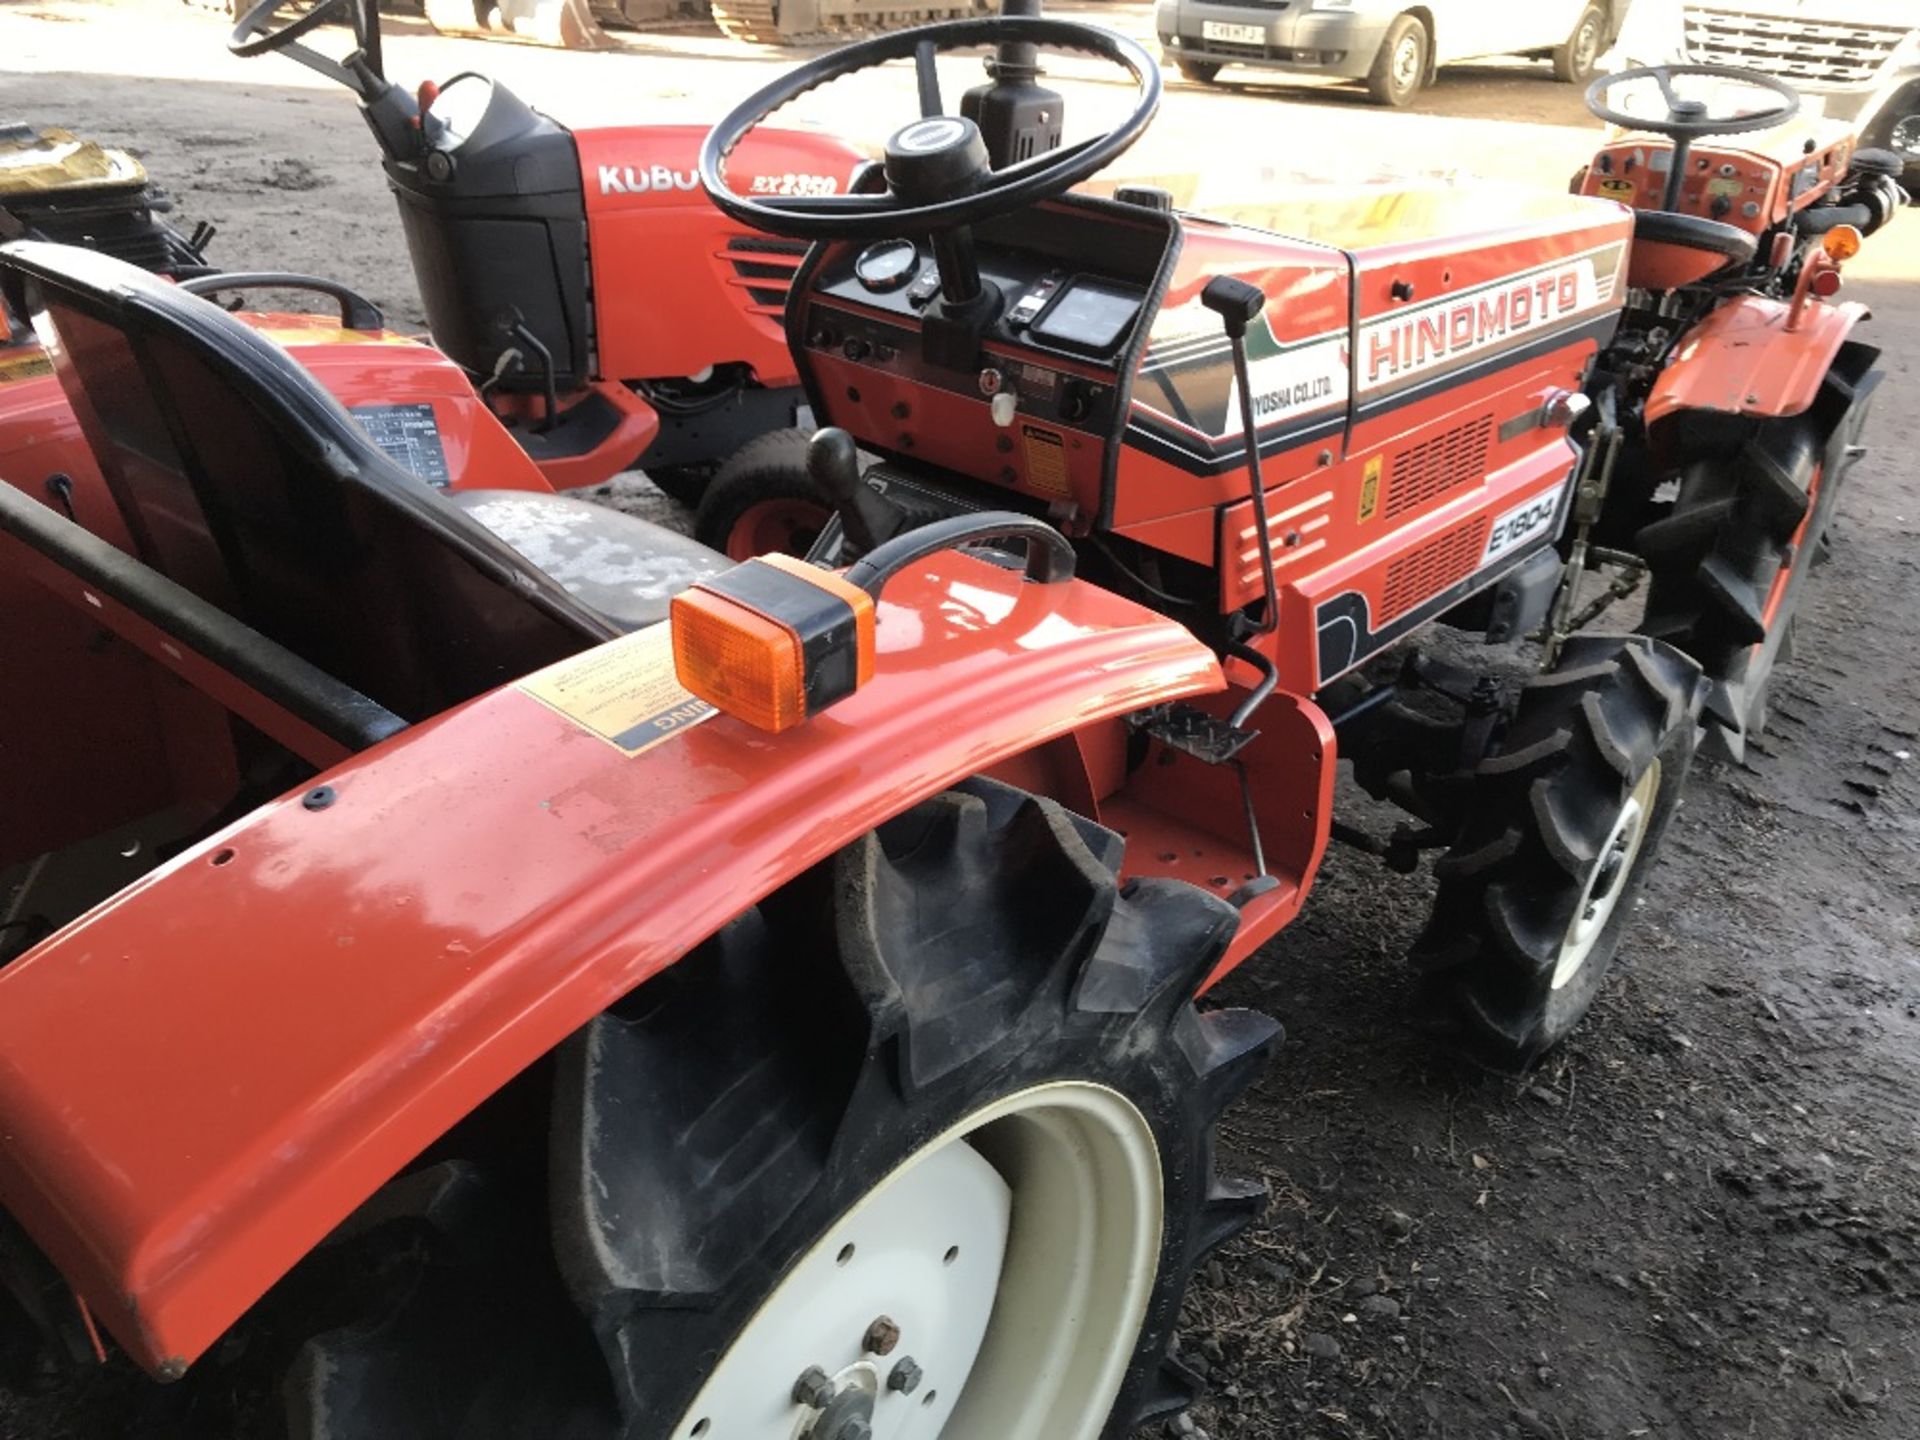 HINOMOTO E1804 4WD COMPACT TRACTOR SN:0679 WHEN TESTED WAS SEEN TO RUN, DRIVE, STEER AND BRAKE - Image 3 of 4